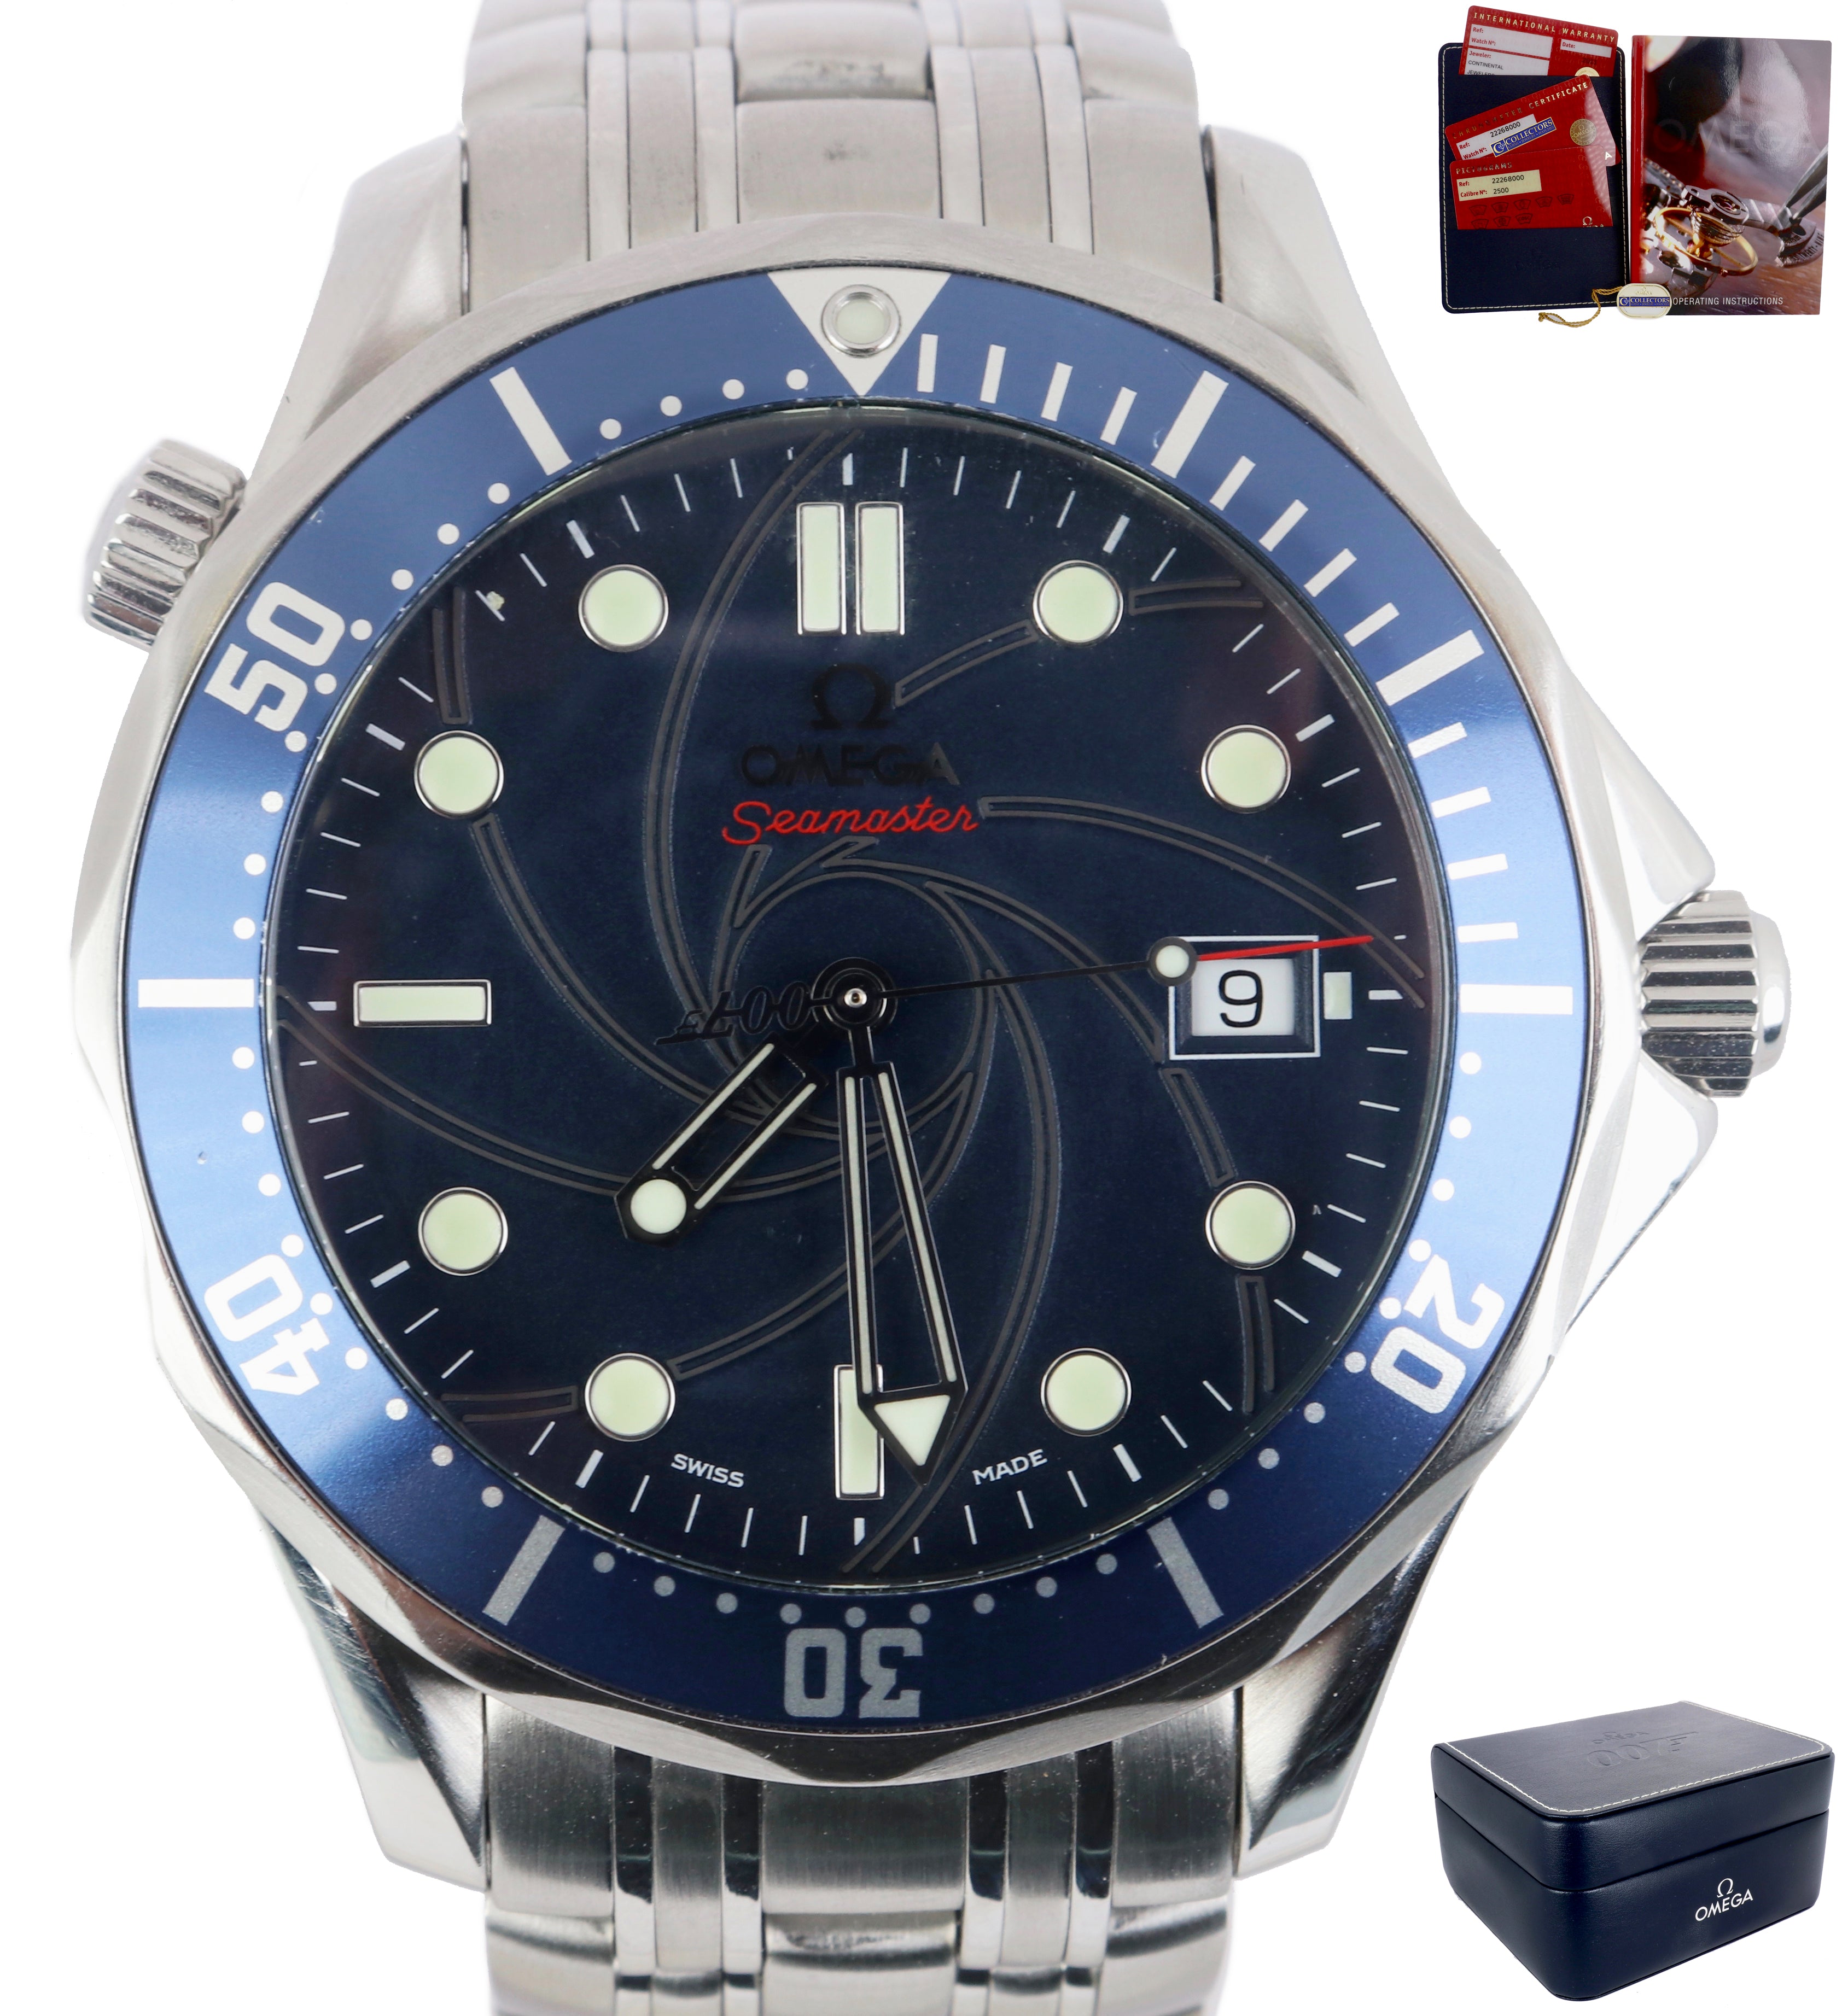 MINT Omega Seamaster Limited 007 James Bond Stainless 2226.80 Automatic 41mm